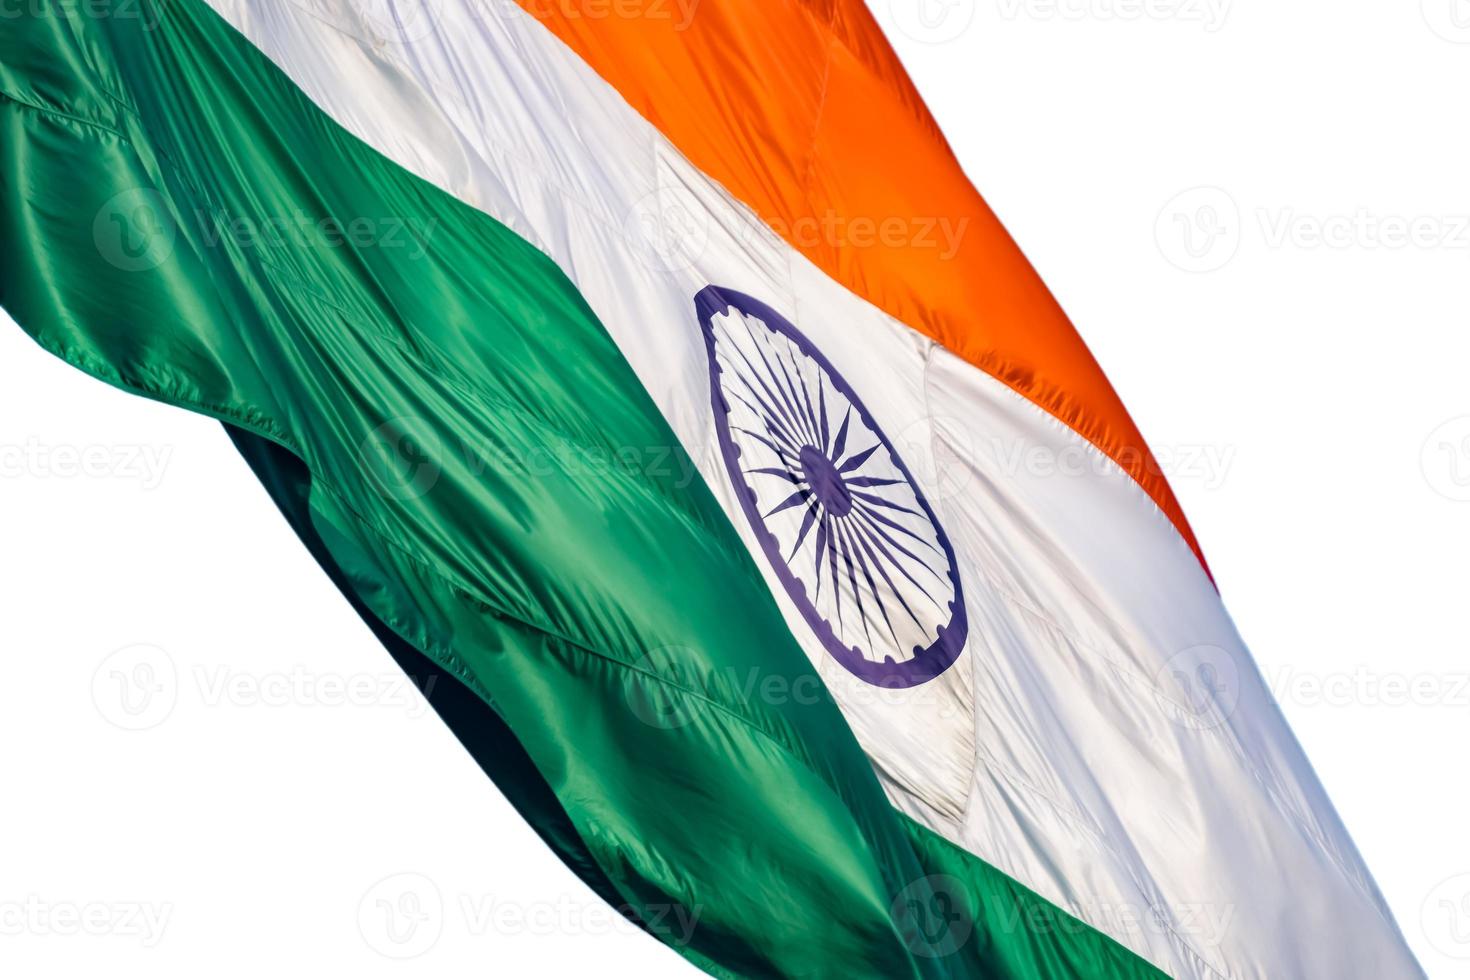 India flag flying high at Connaught Place with pride with plain white background, India flag fluttering, Indian Flag on Independence Day and Republic Day of India, tilt up shot, Har Ghar Tiranga photo